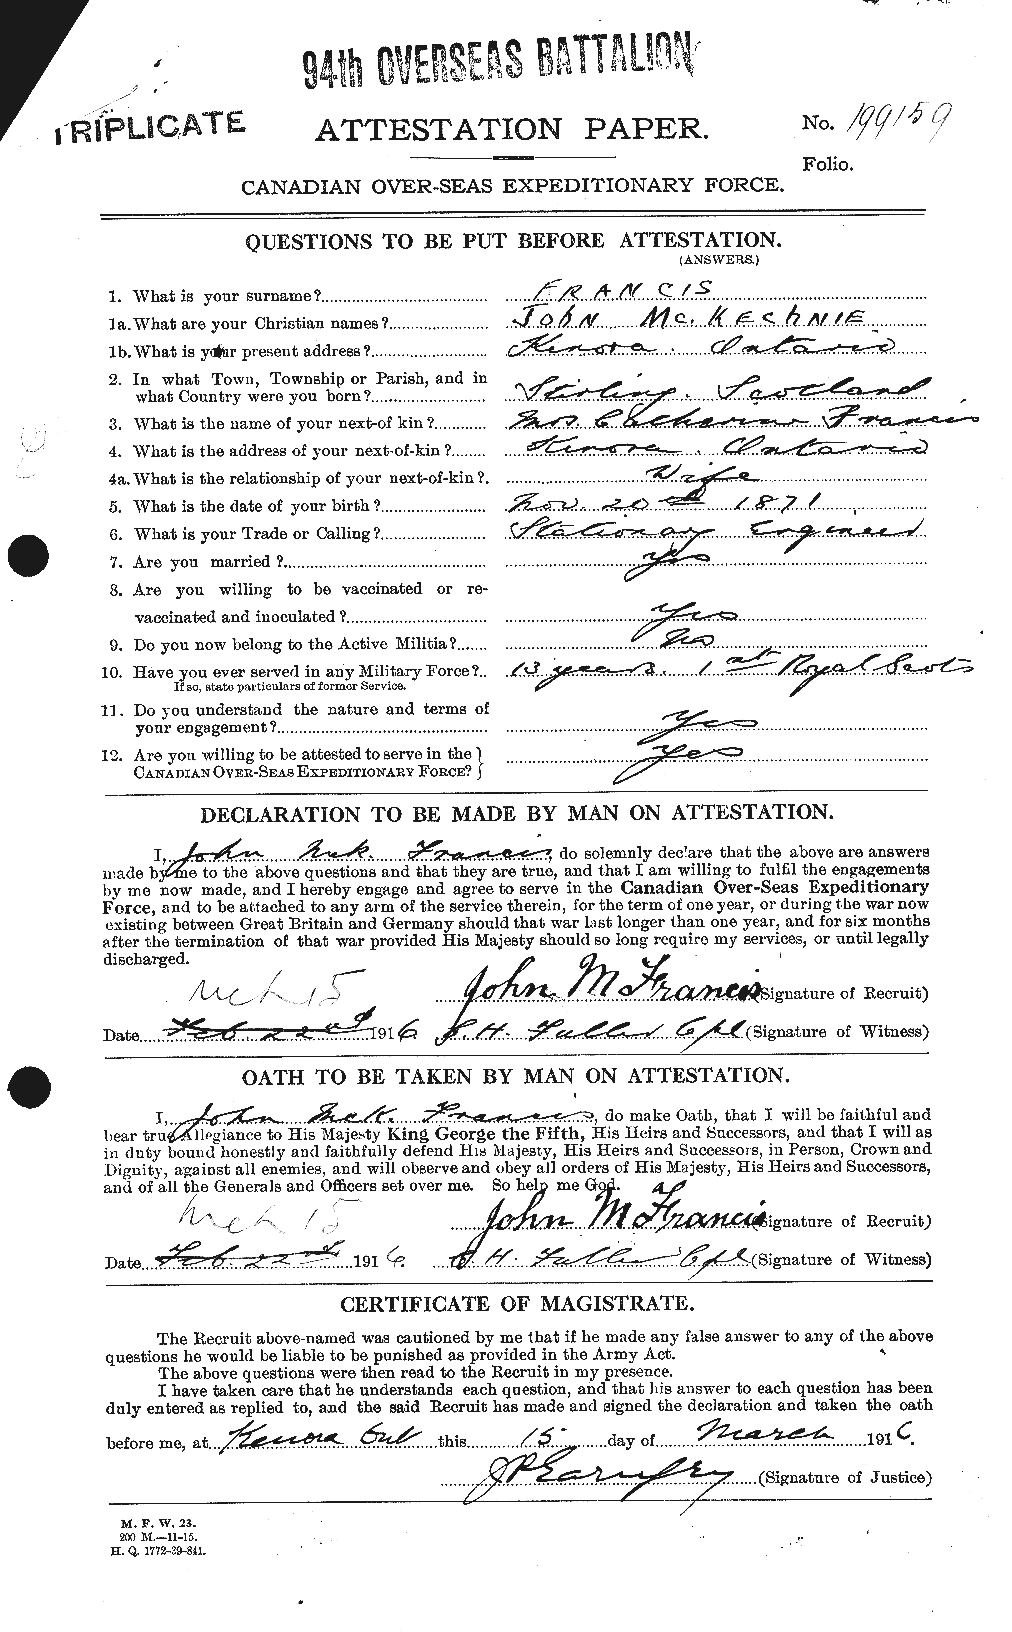 Personnel Records of the First World War - CEF 336748a